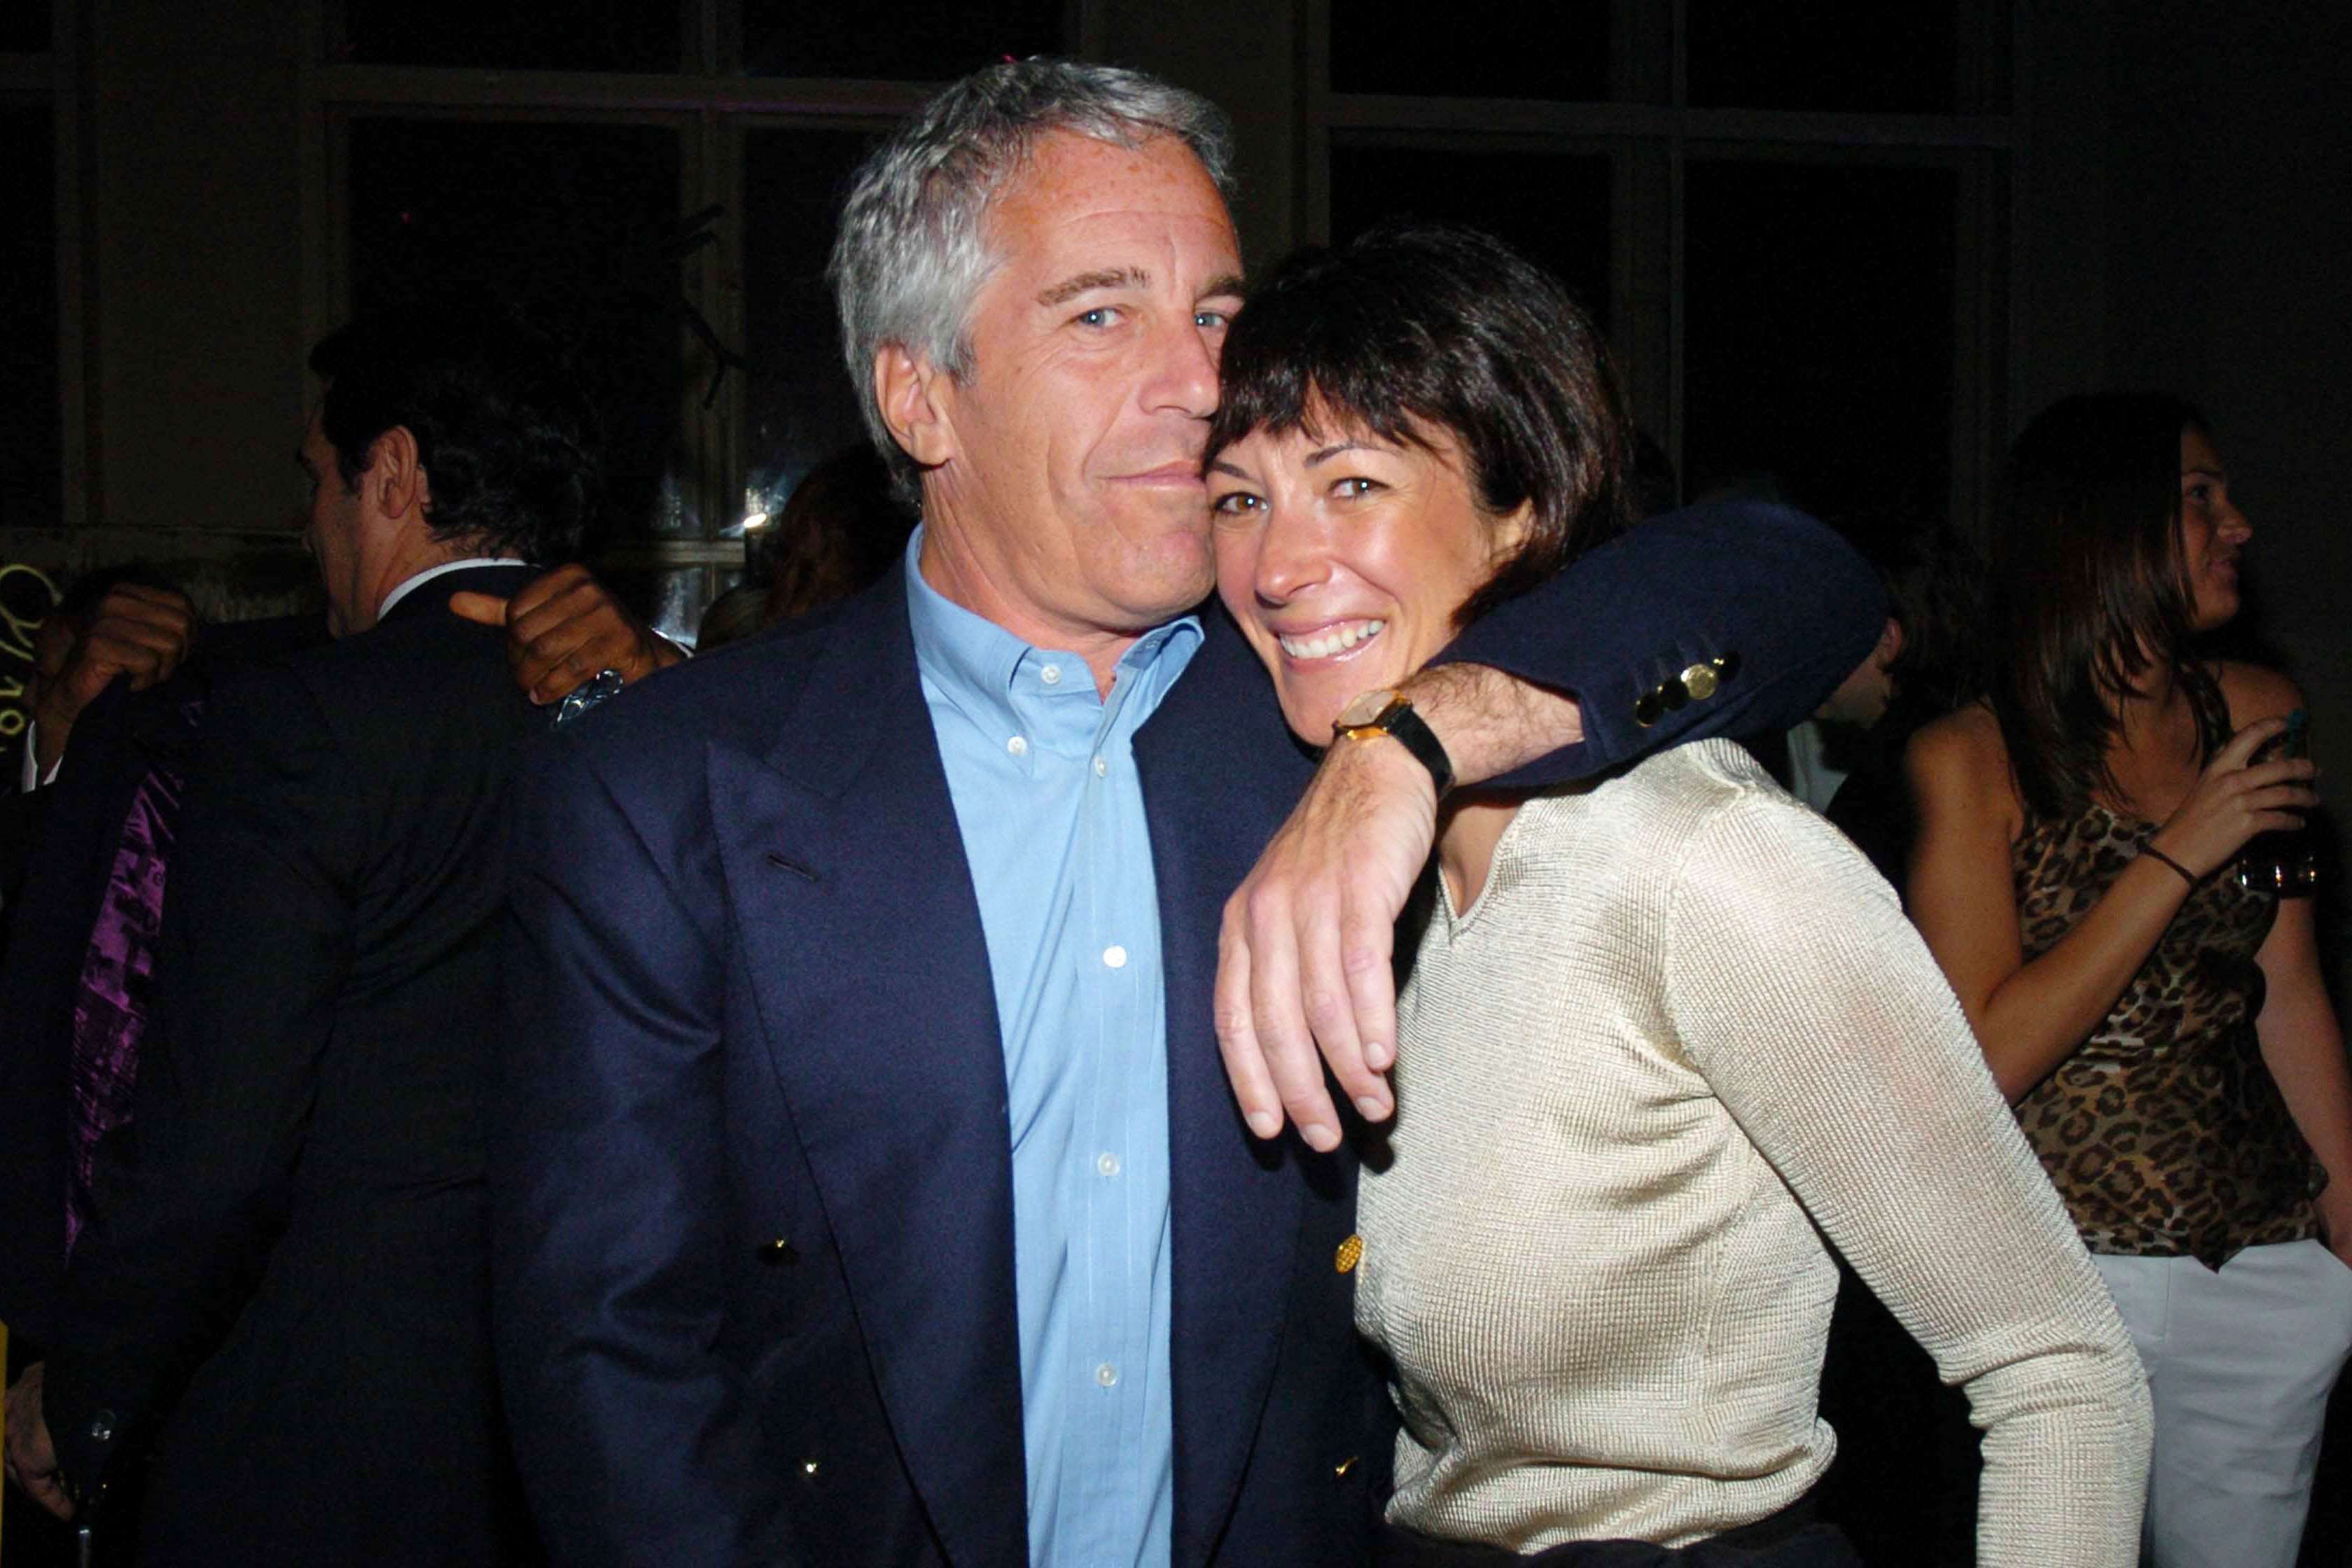 image for 'Hundreds of other people could be implicated' in Jeffrey Epstein, Ghislaine Maxwell court documents